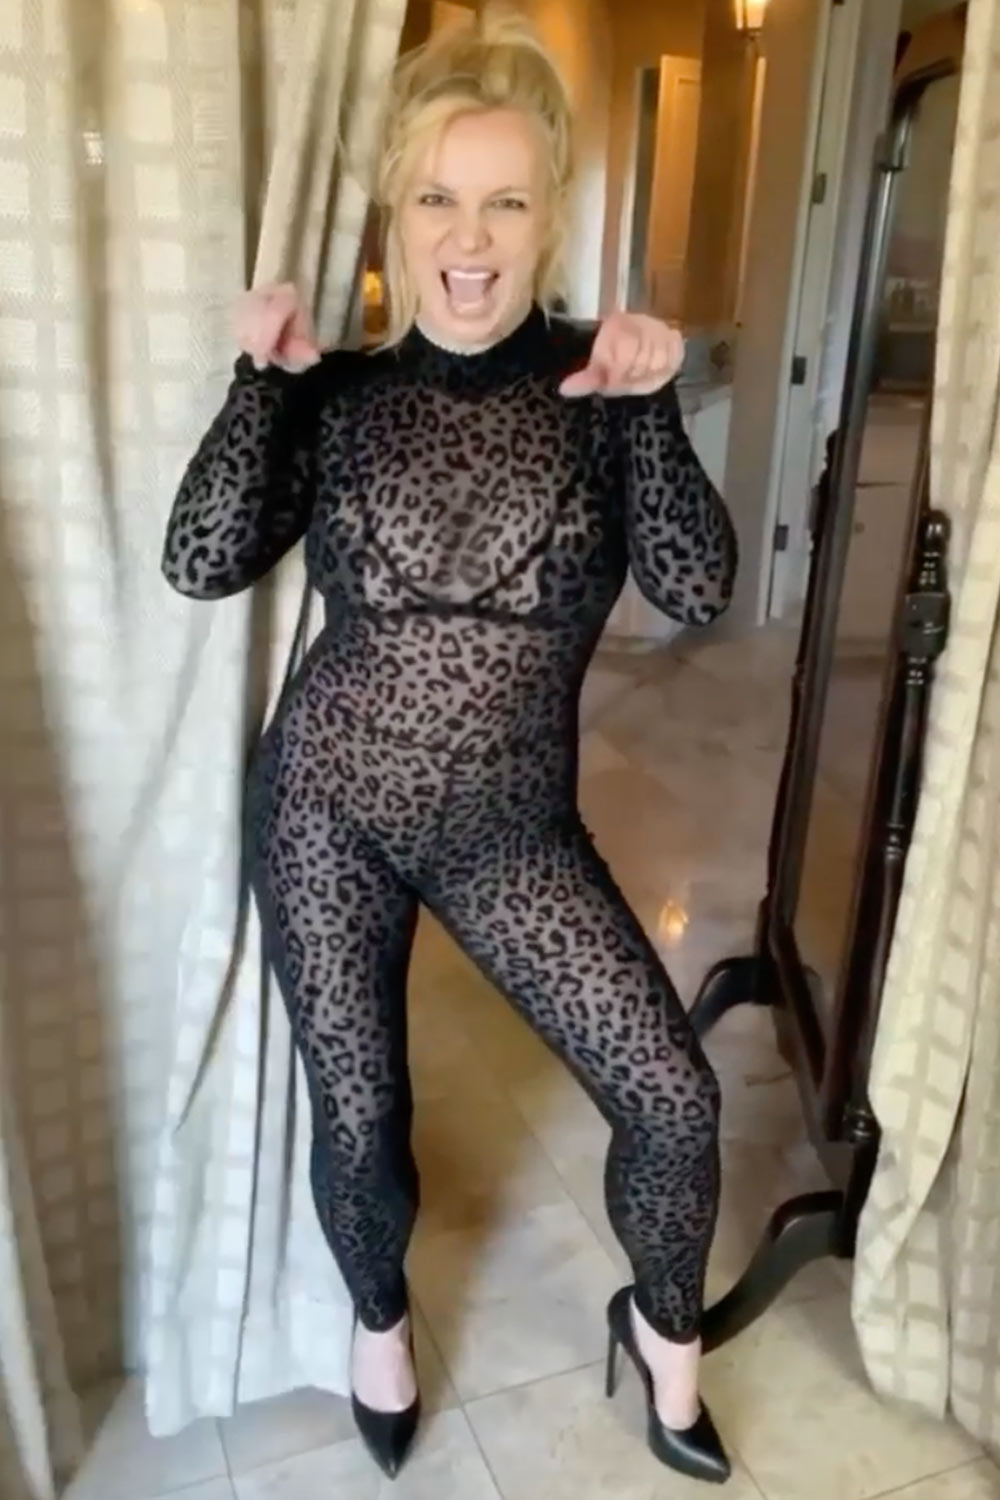 Britney Spears Dances While Wearing Sheer, Leopard-Print Catsuit: 'I Found My Body'